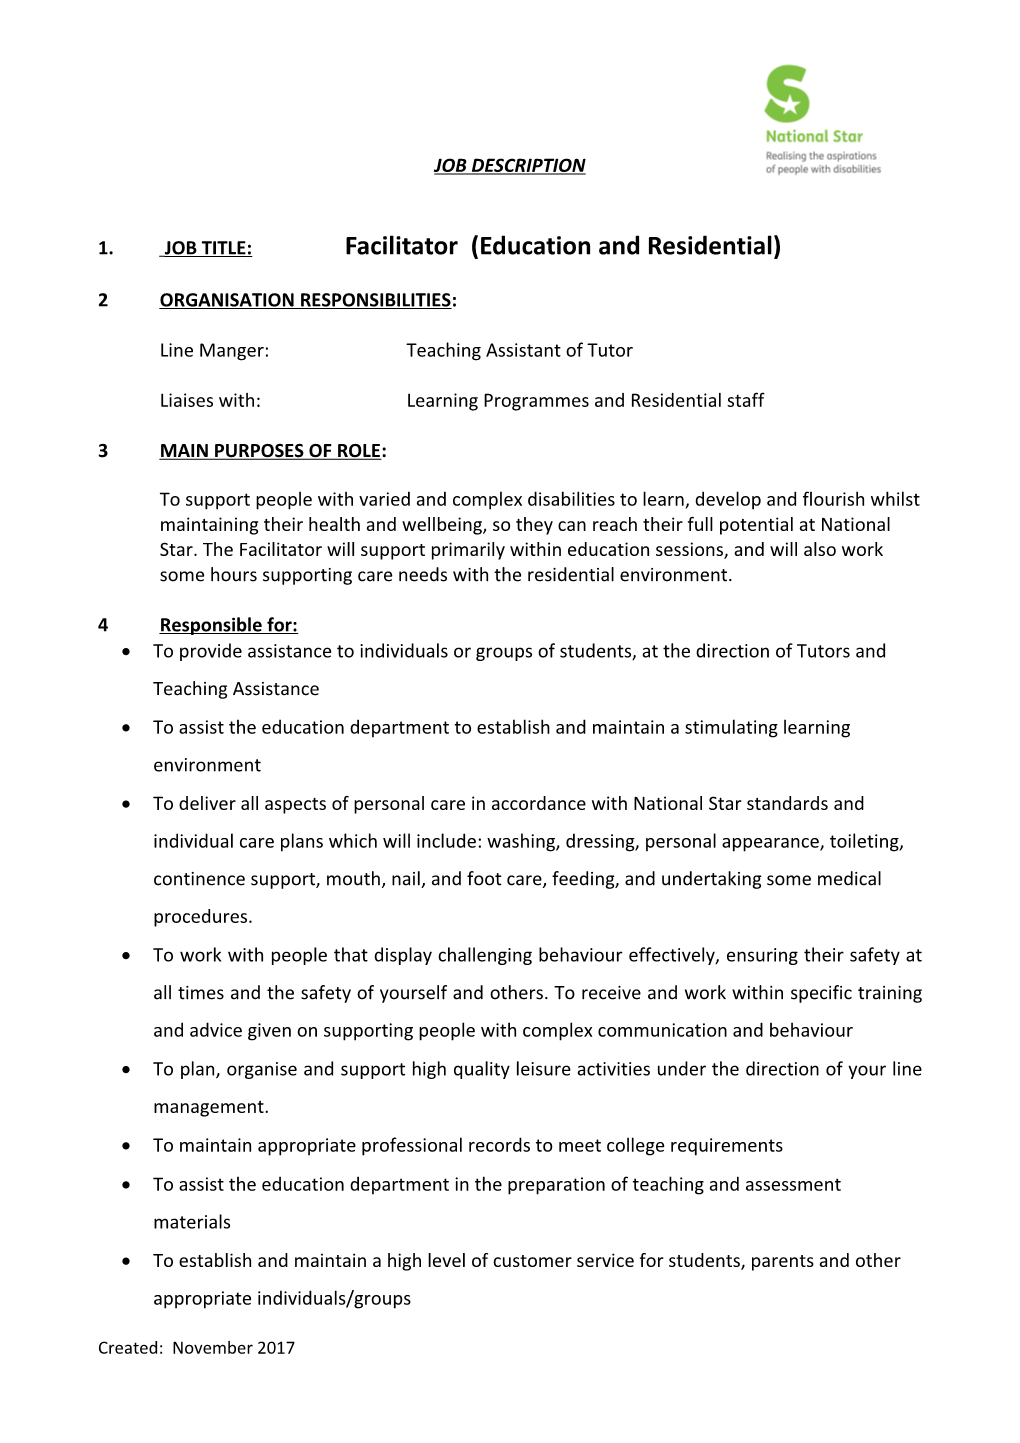 1. JOB TITLE: Facilitator (Education and Residential)